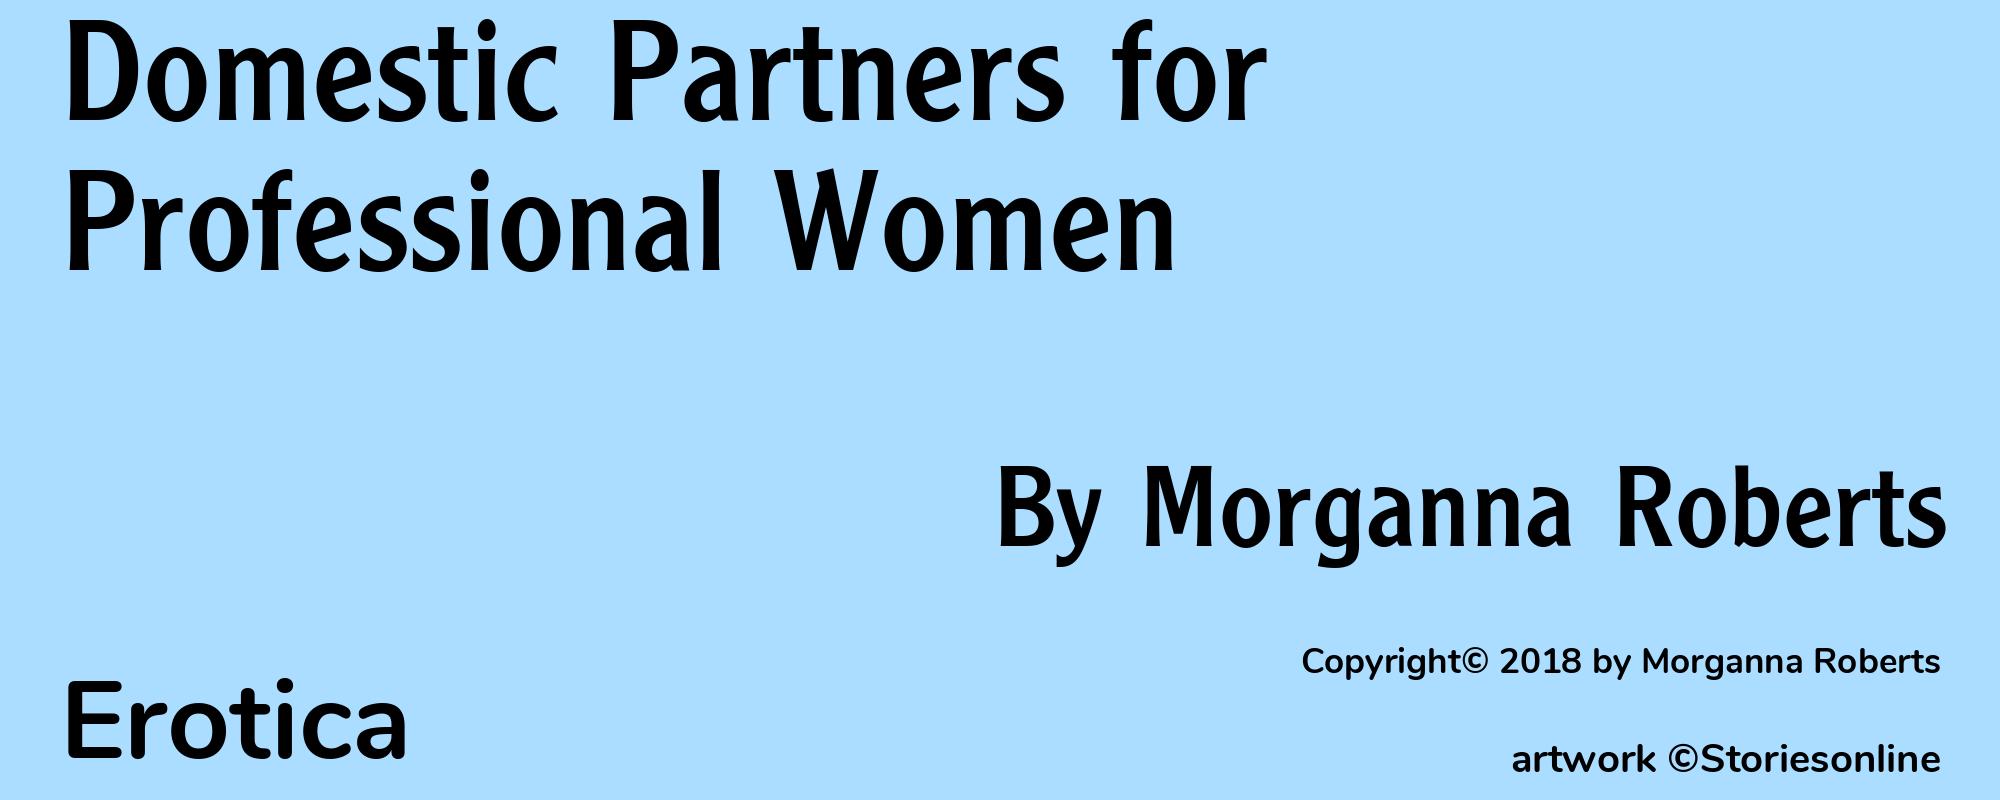 Domestic Partners for Professional Women - Cover